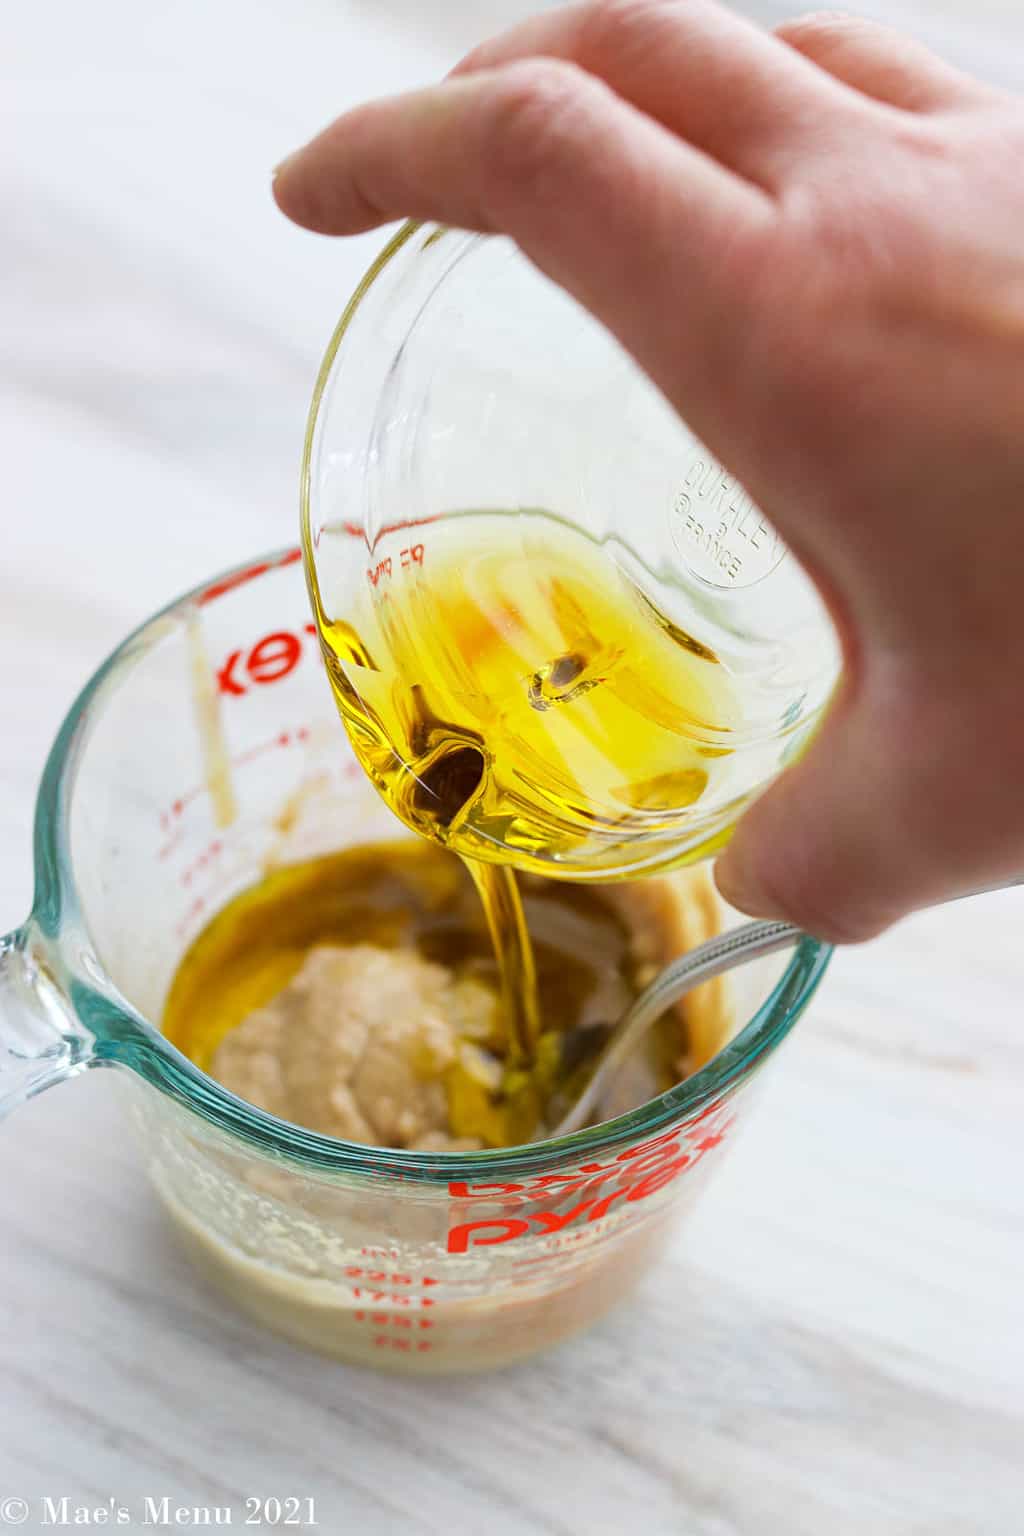 Pouring olive oil into the tahini mixture